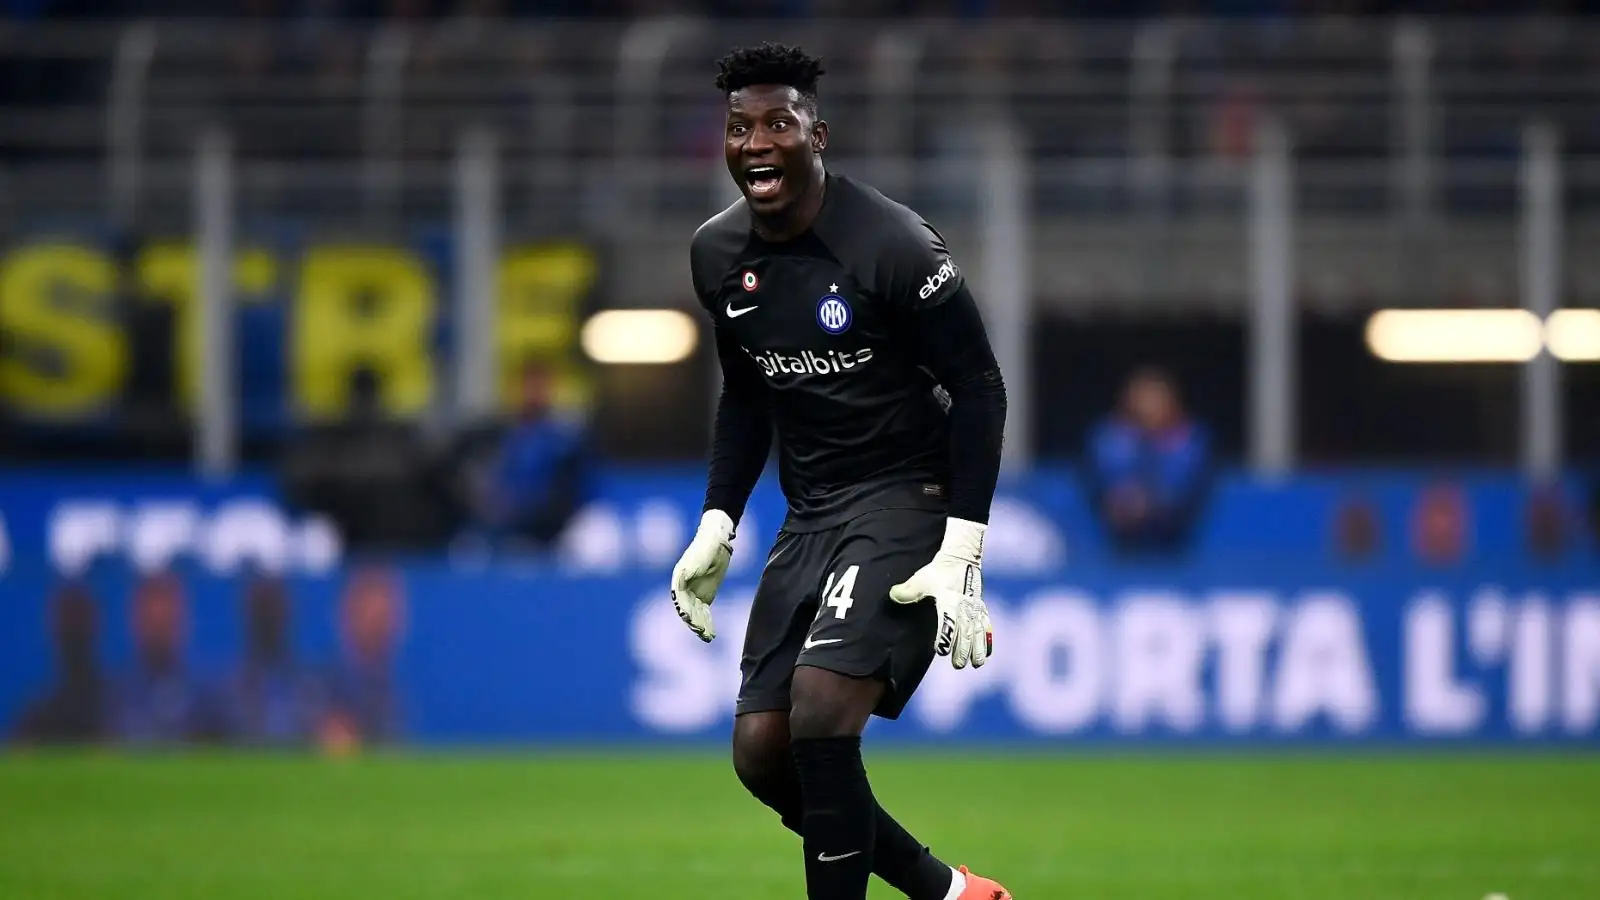 Manchester United-linked goalkeeper Andre Onana in action for Inter